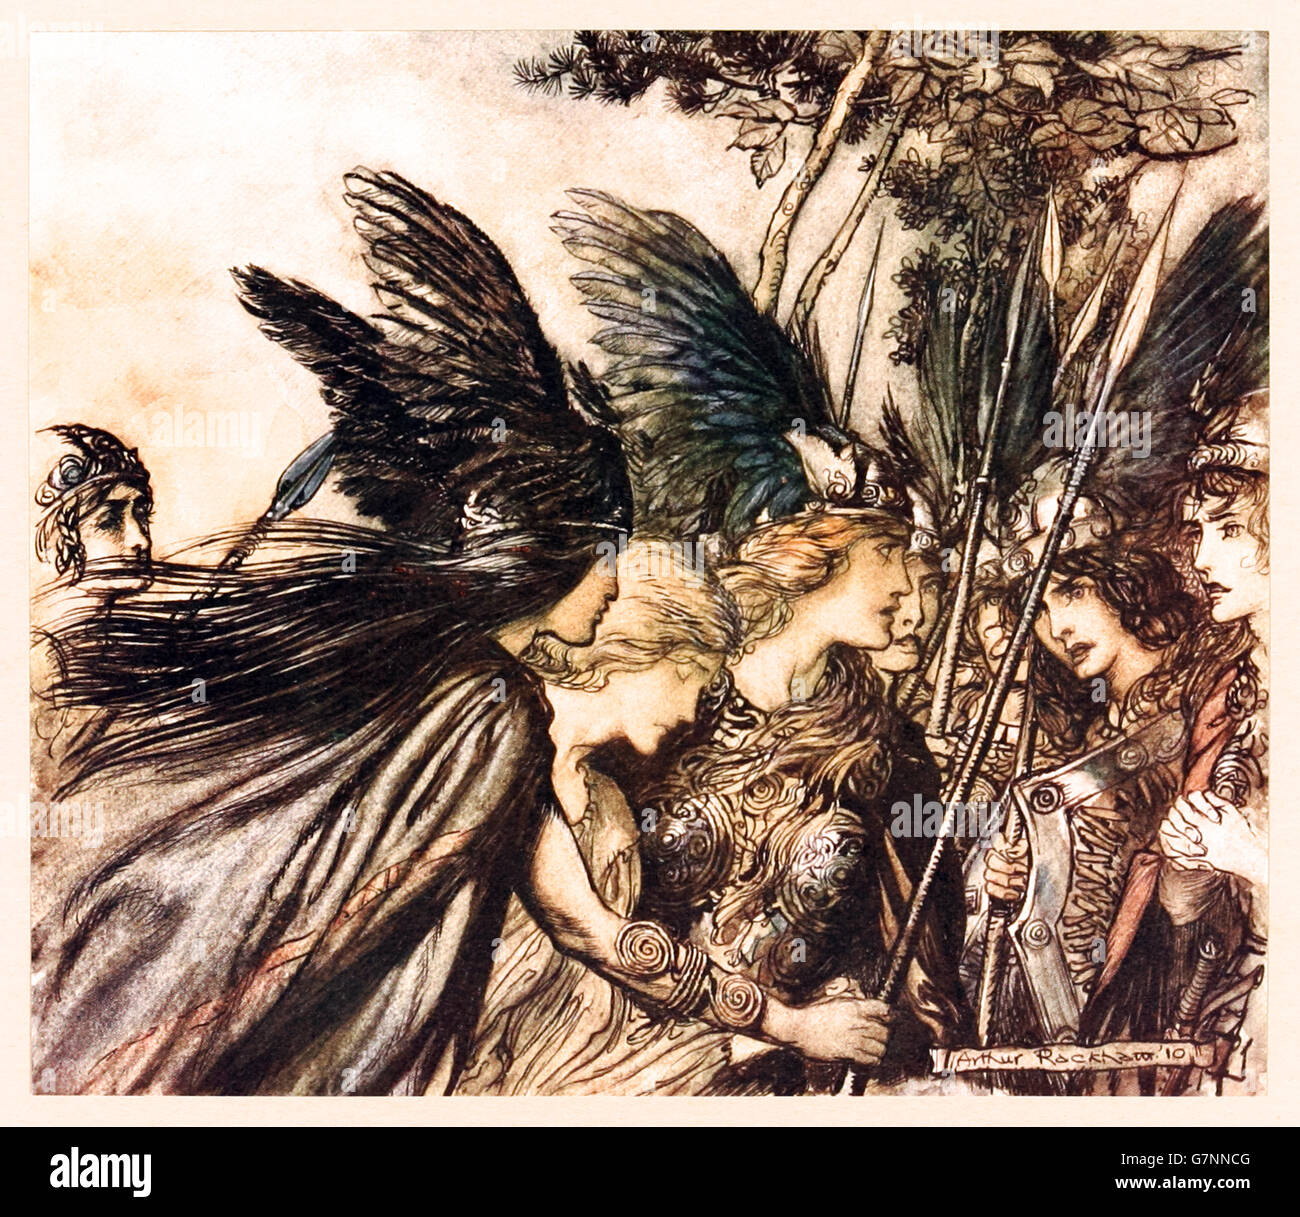 Brunnhilde: “I flee for the first time And am pursued: Warfather follows close. He nears, he nears in fury! Save this woman! Sisters, your help!” from ‘The Rhinegold & the Valkyrie’ illustrated by Arthur Rackham (1867-1939), published in 1910. Stock Photo